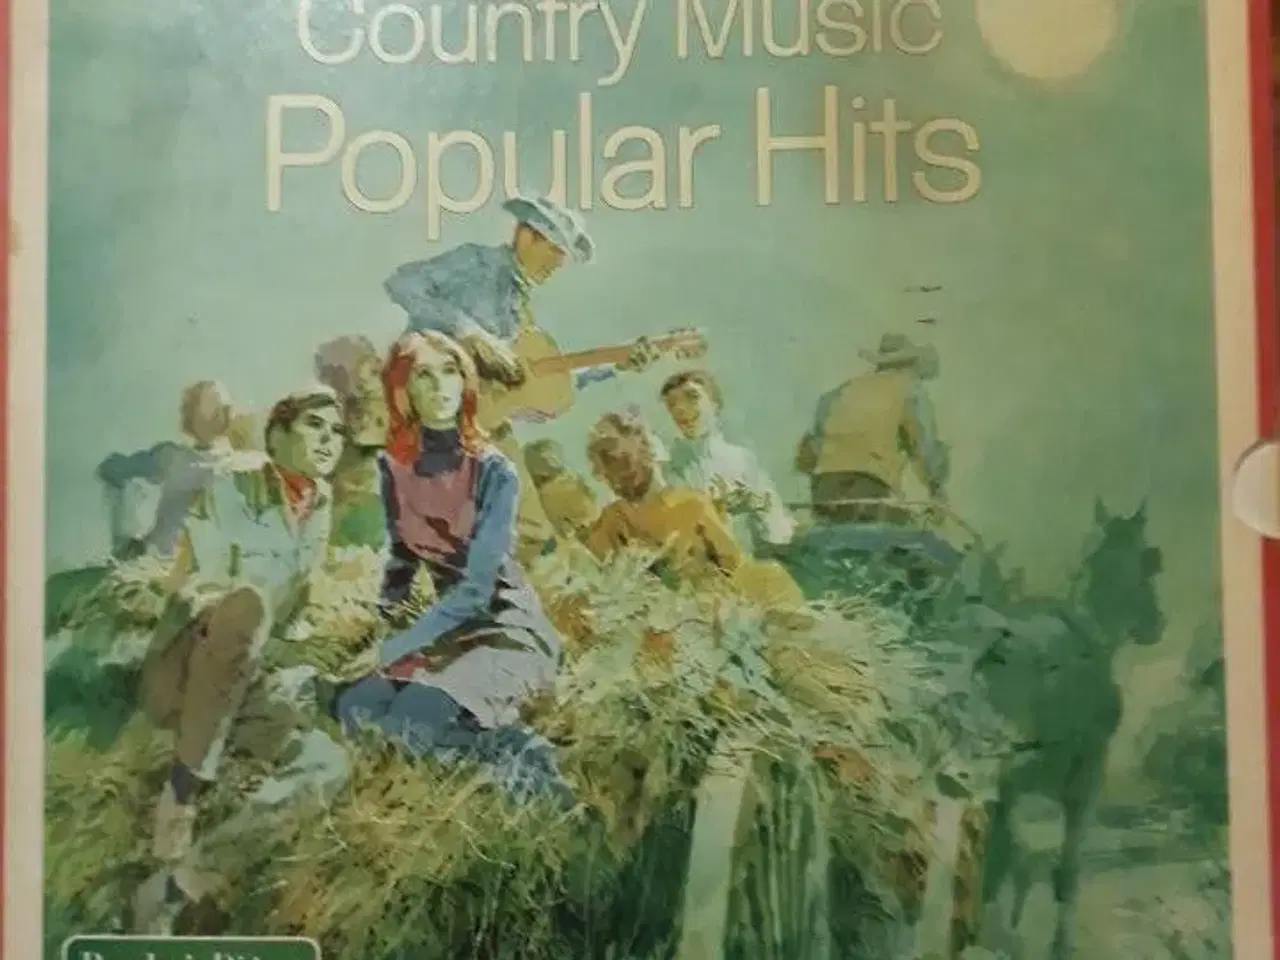 Billede 1 - Country Music Popular Hits